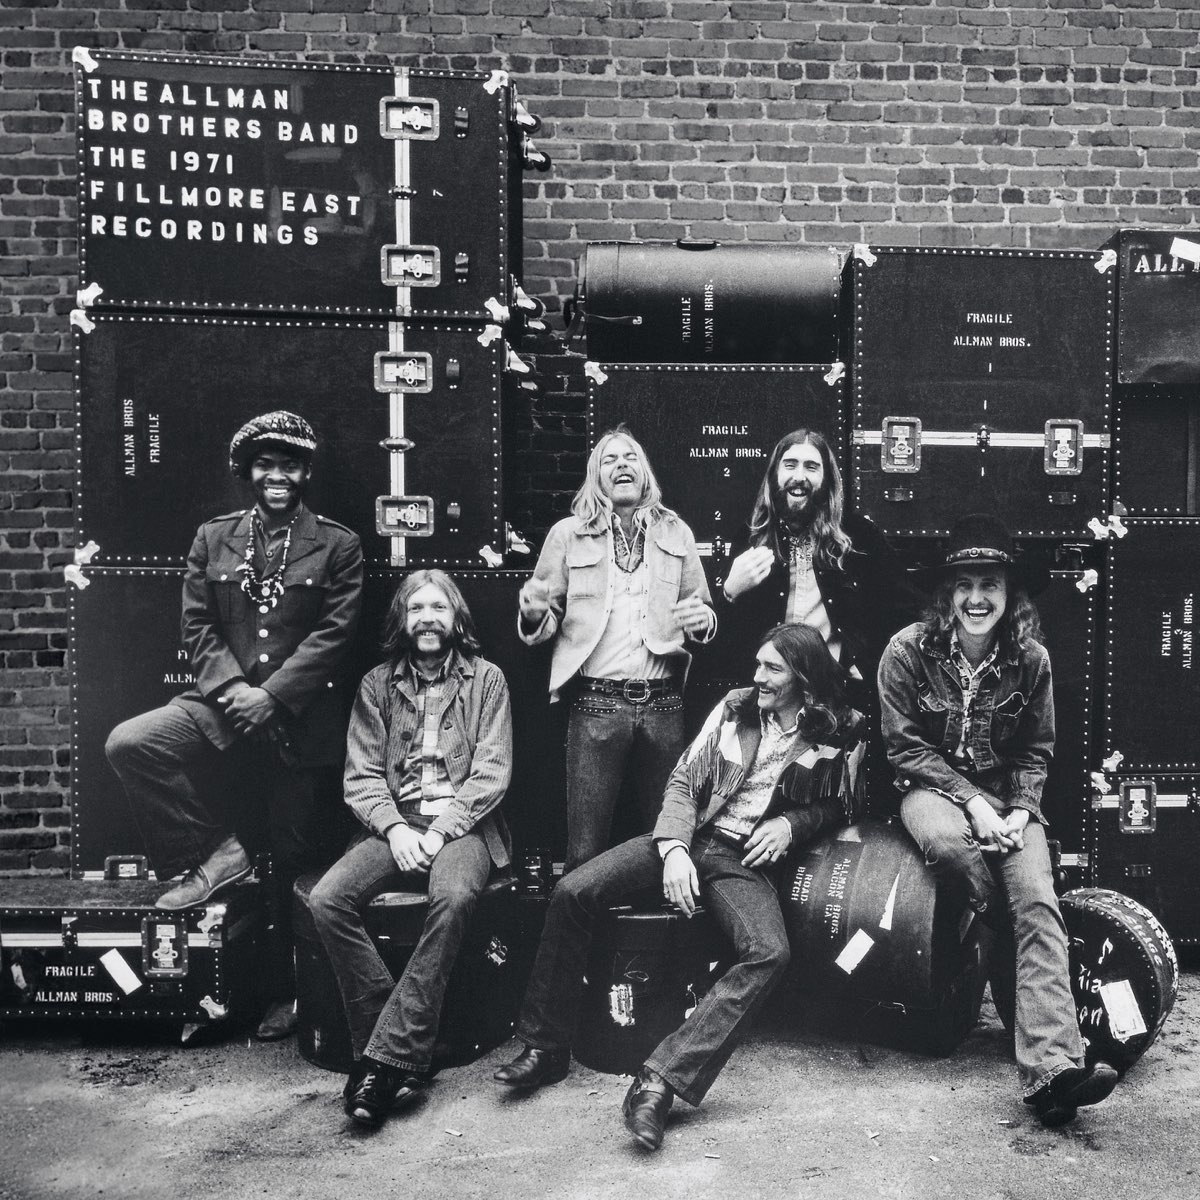 Founding members of the allman brothers band